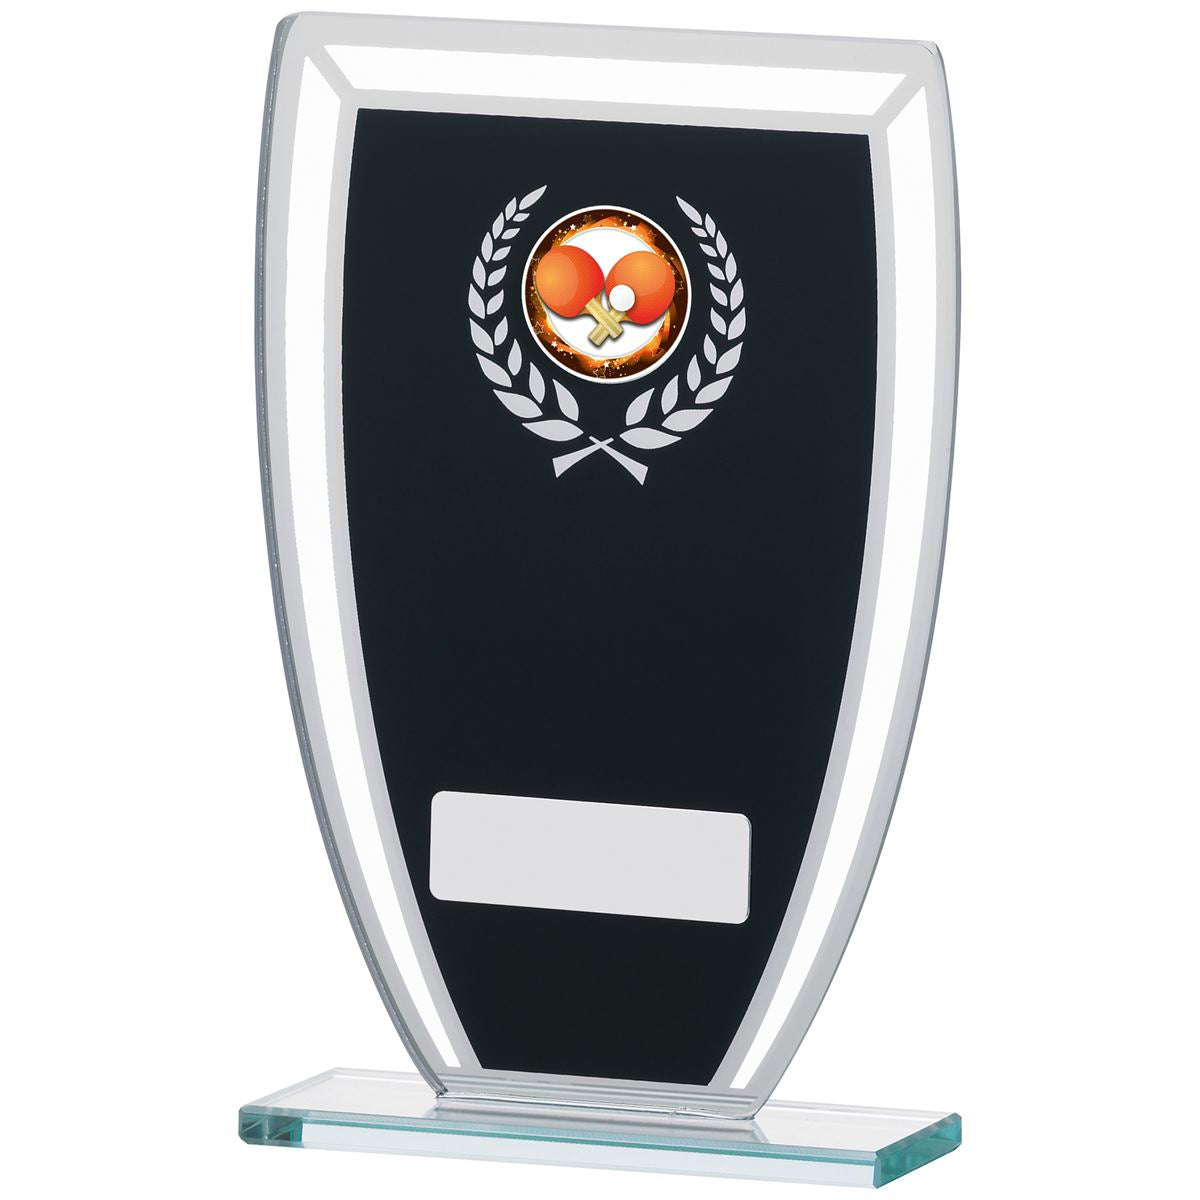 Black Glass Award Shield with Silver Details